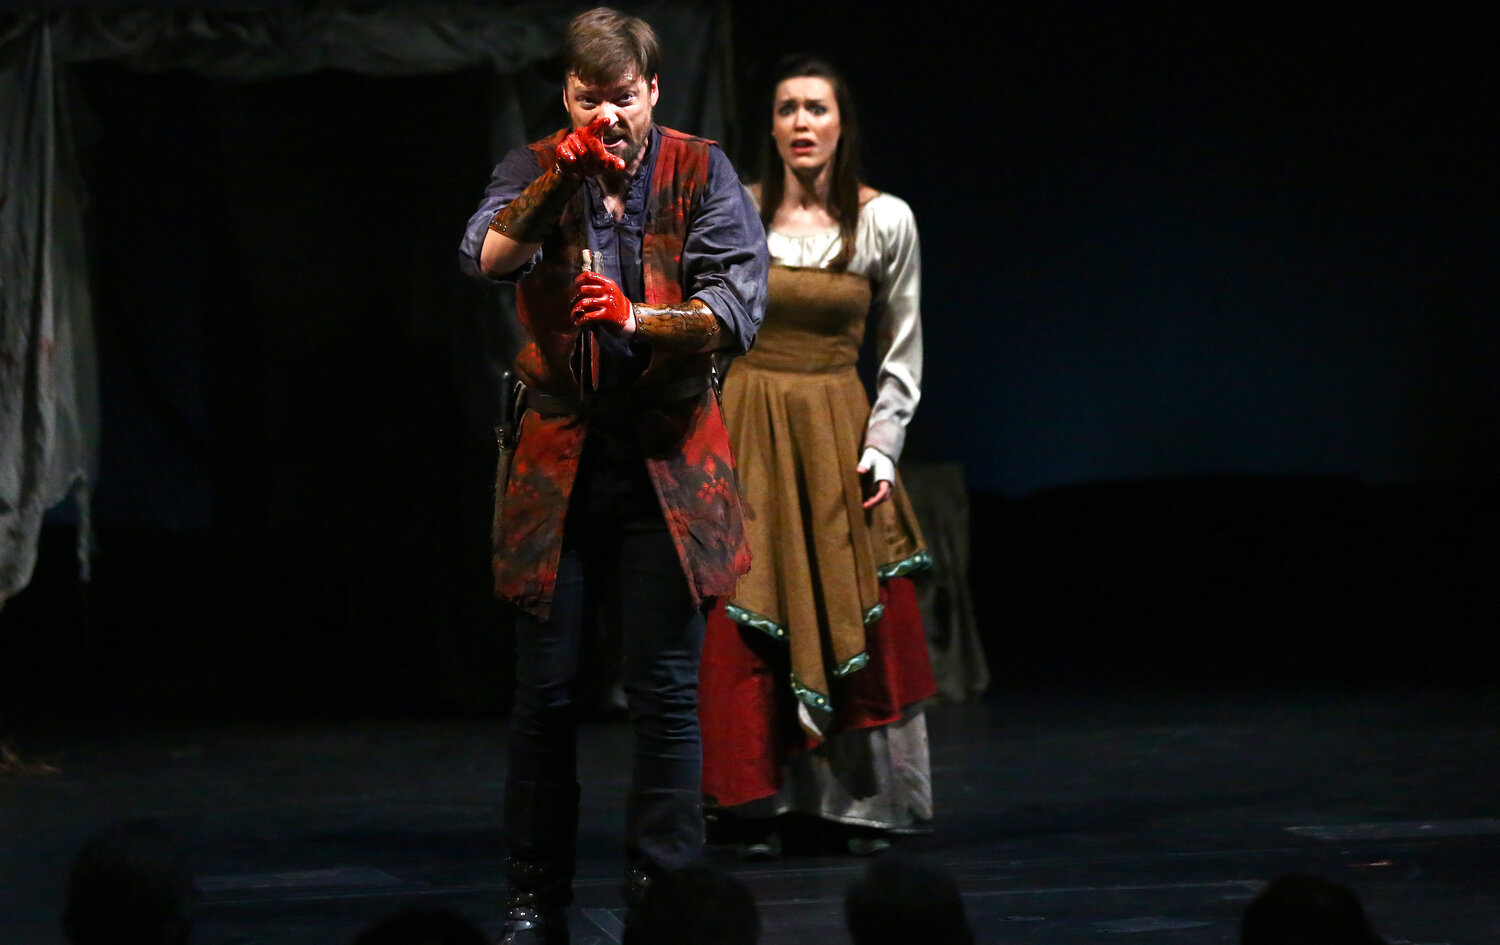 Actors stage a past production of “Macbeth” at Southwest Shakespeare Company in the Valley.